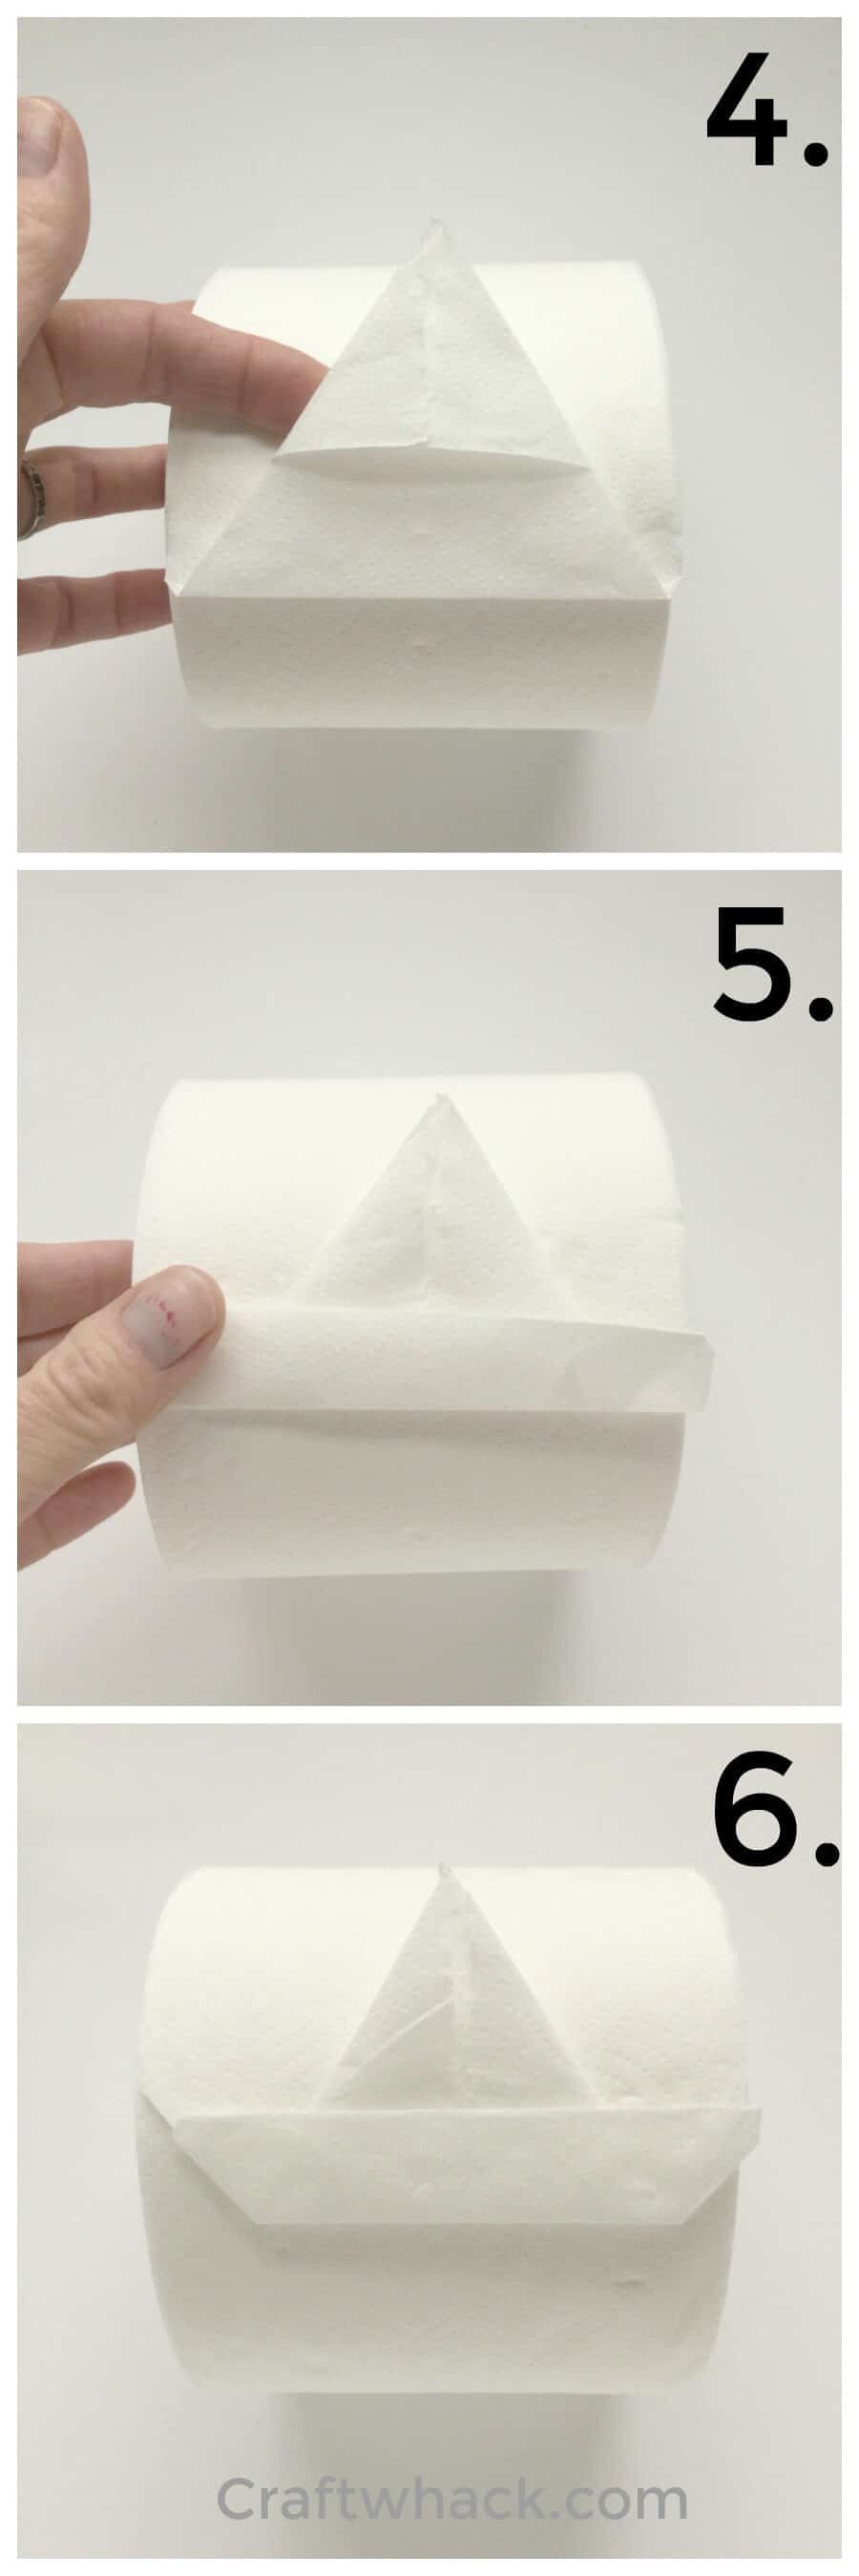 easy step by step toilet paper origami